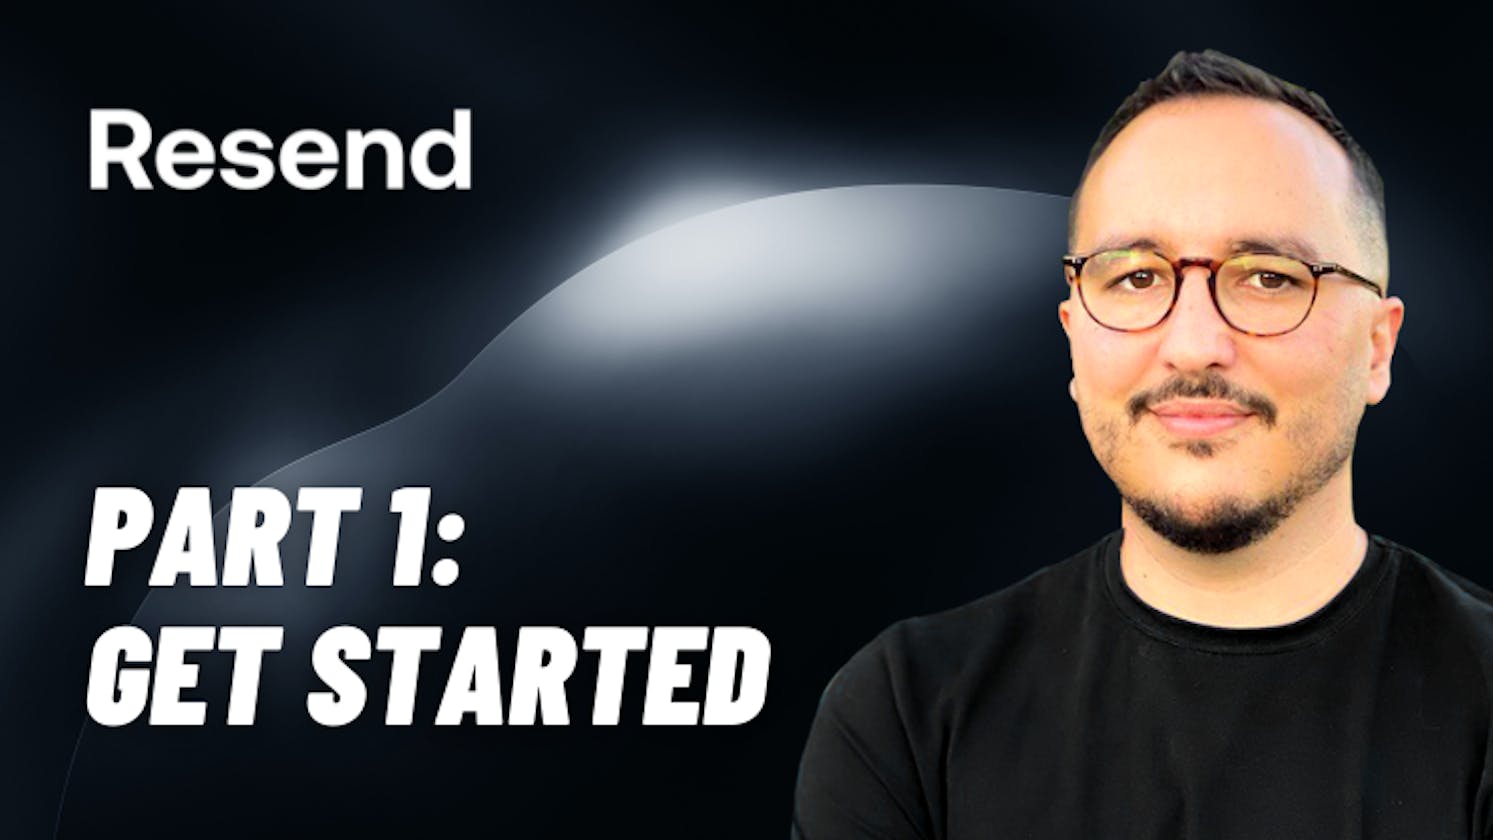 Get Started with Resend